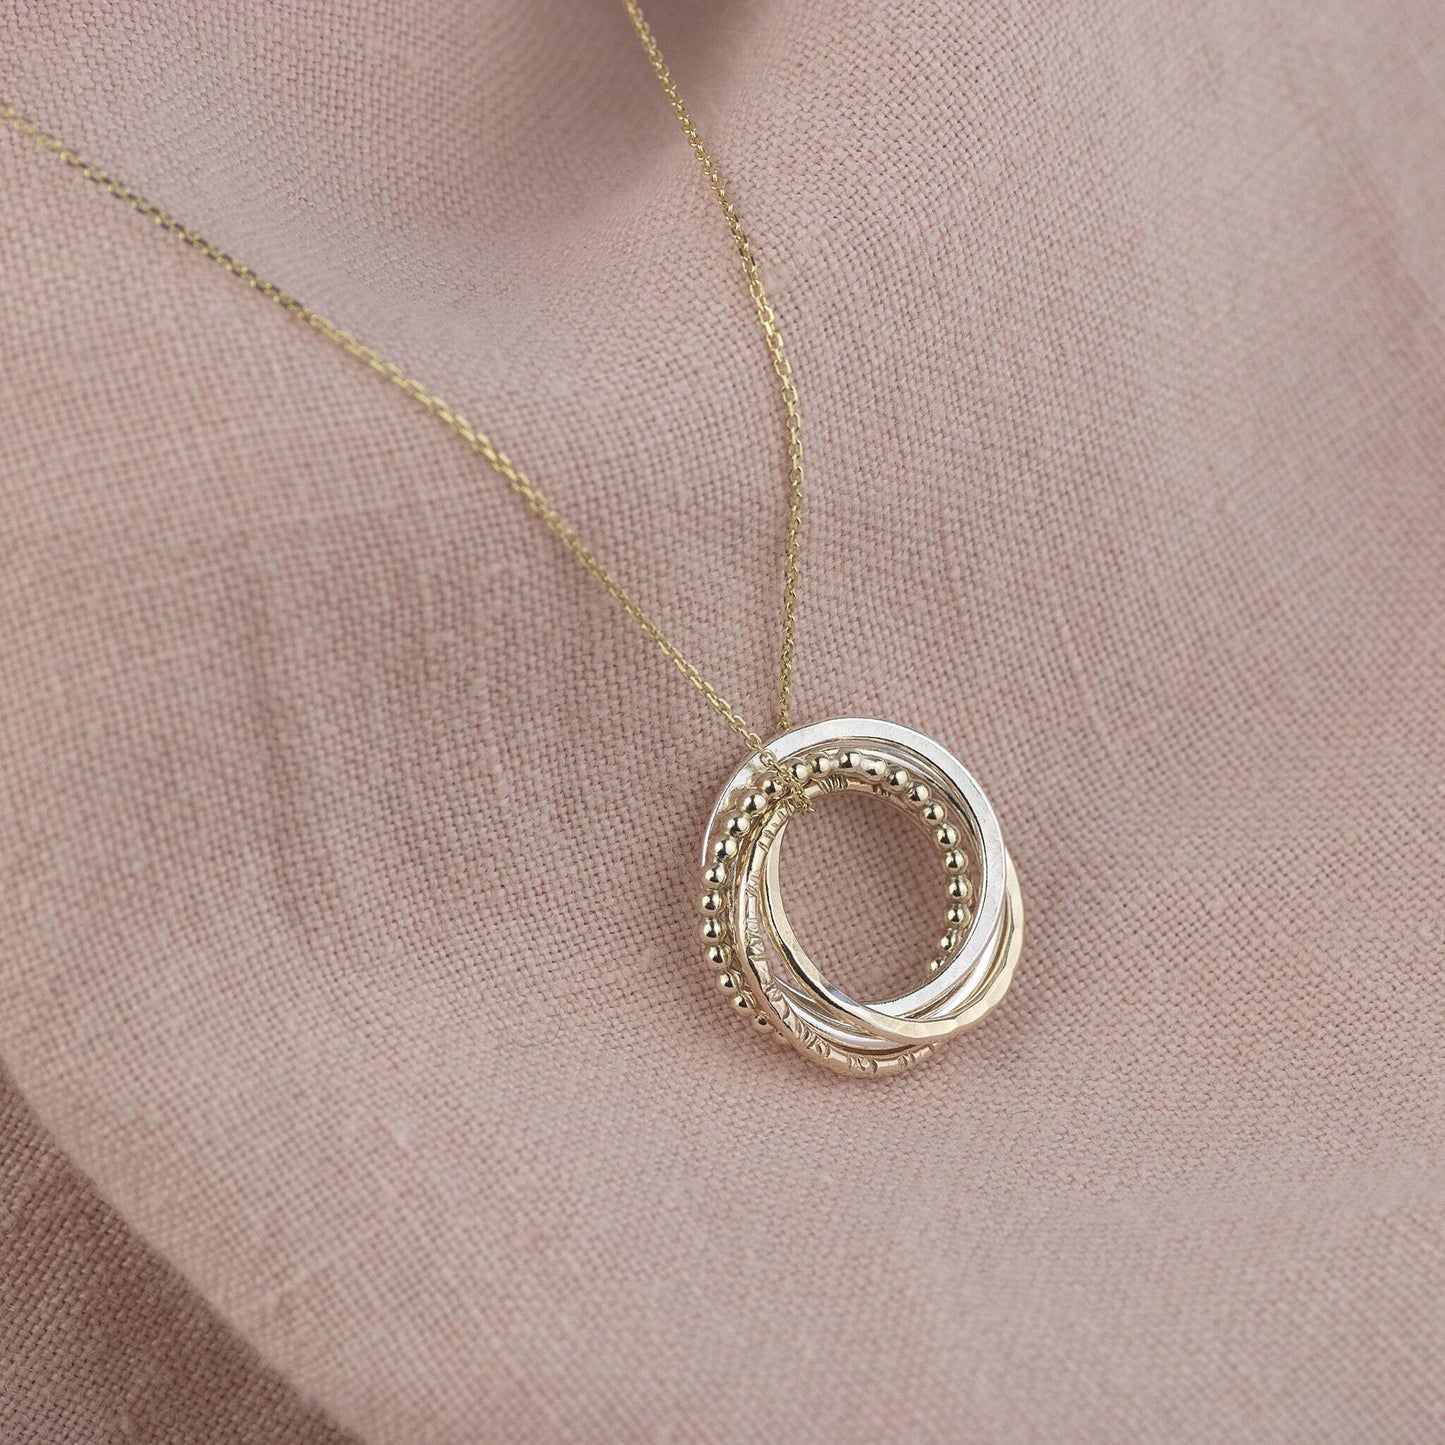 9kt Gold 50th Birthday Necklace - The Original 5 Links for 5 Decades Necklace